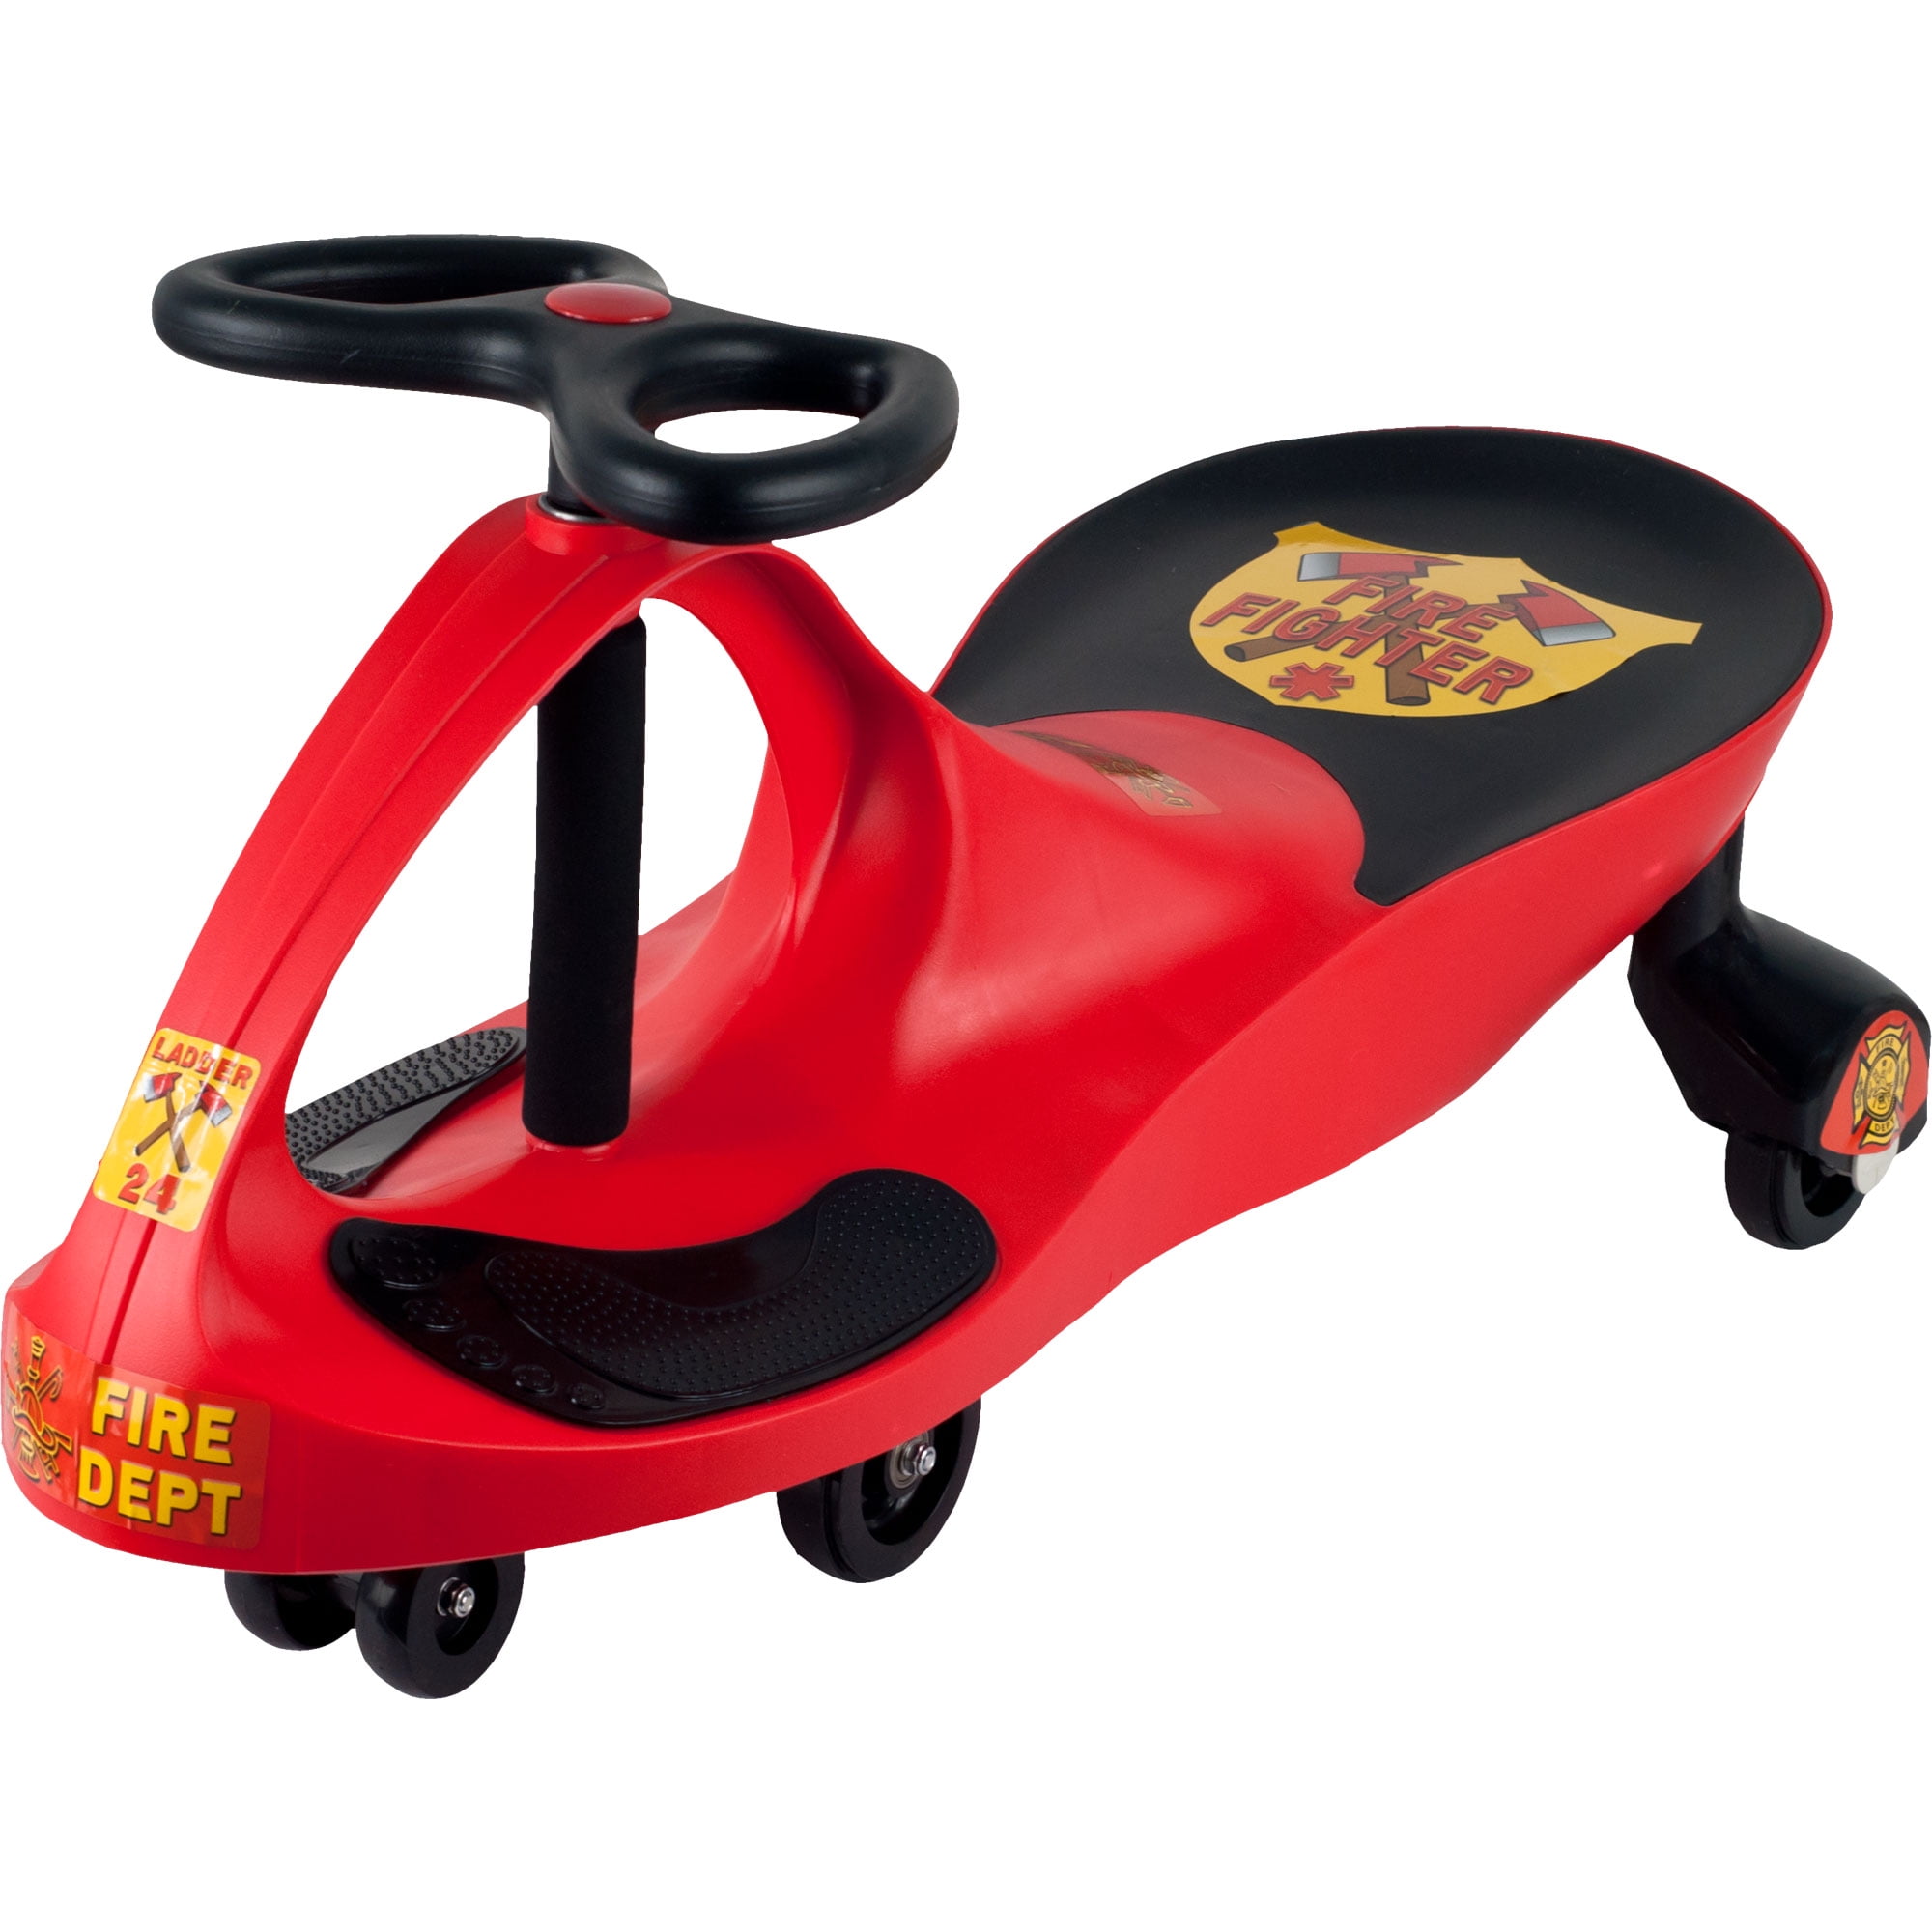 EZY ROLLER PRO RIDE ON TOY - toys & games - by owner - sale